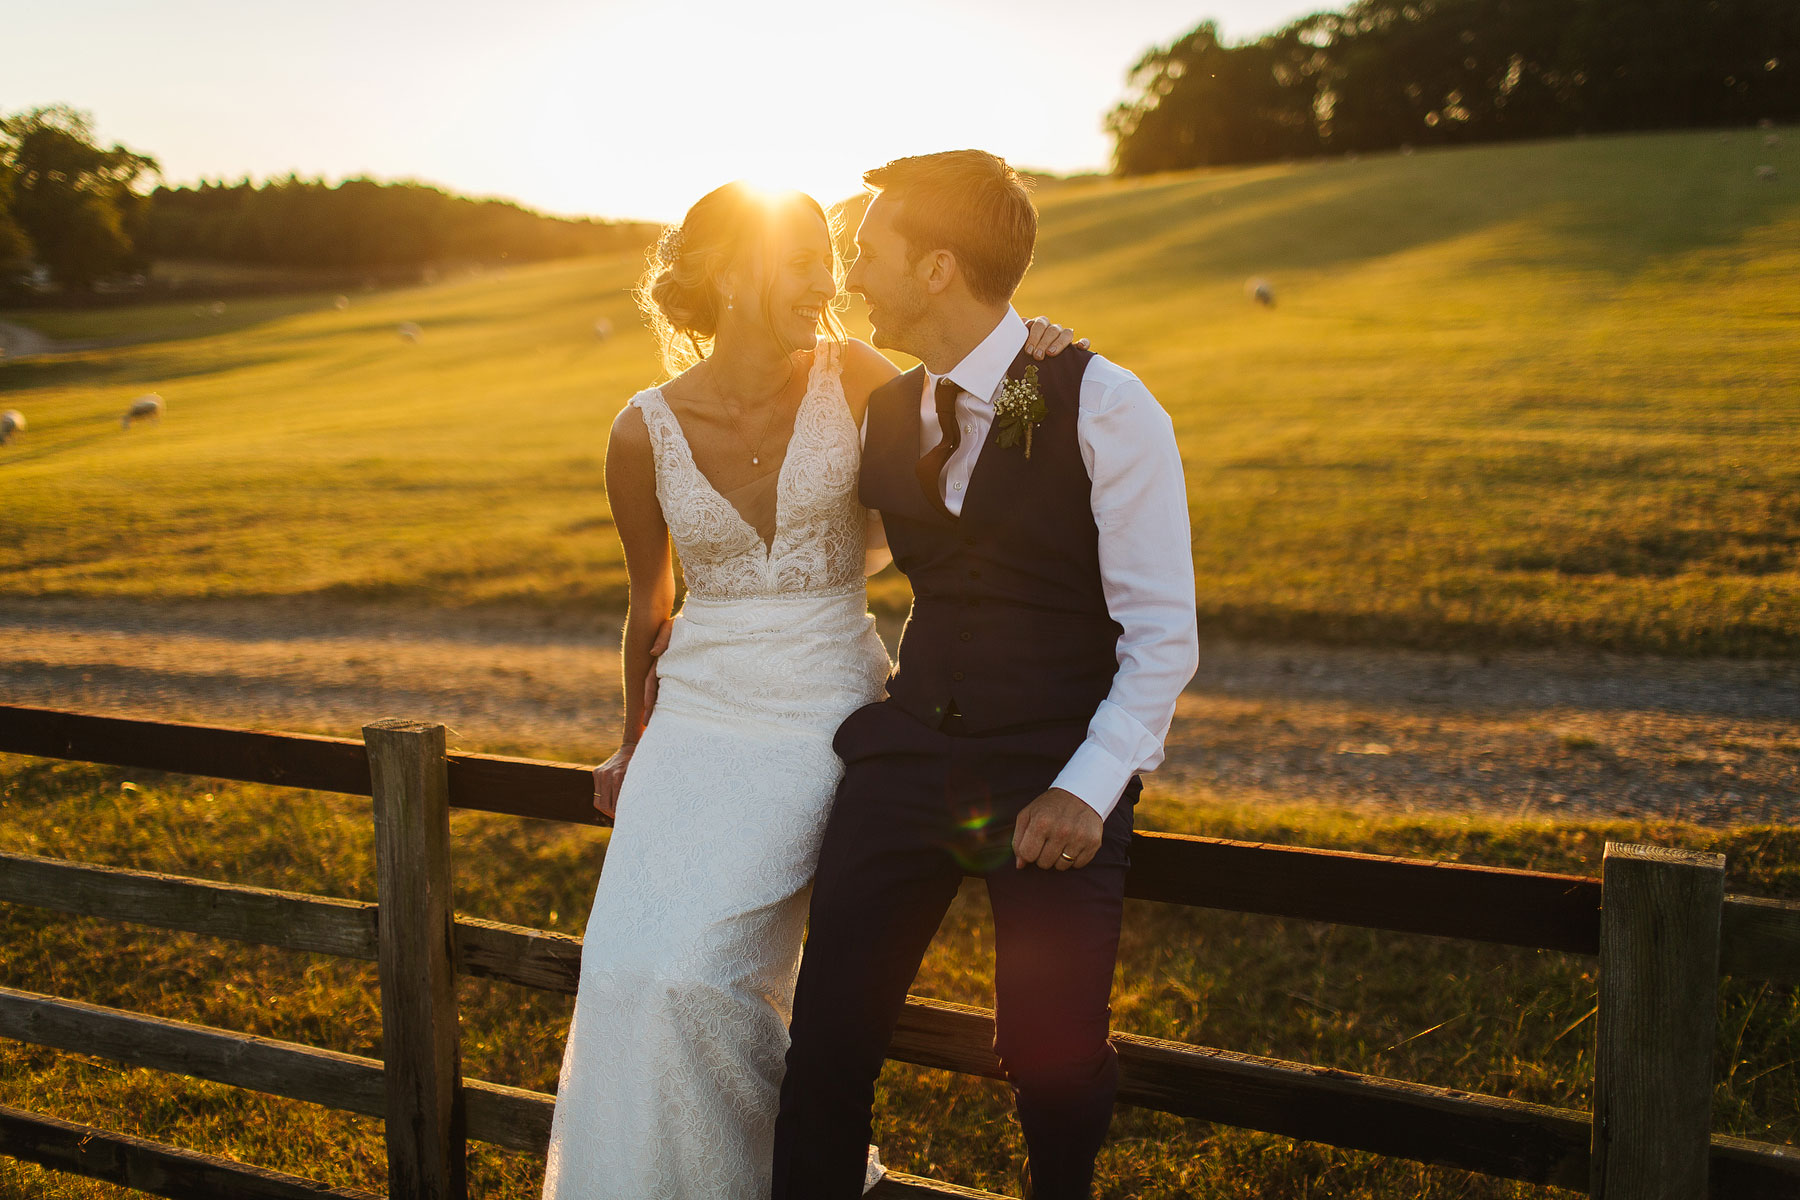 amazing wedding pictures in yorkshire